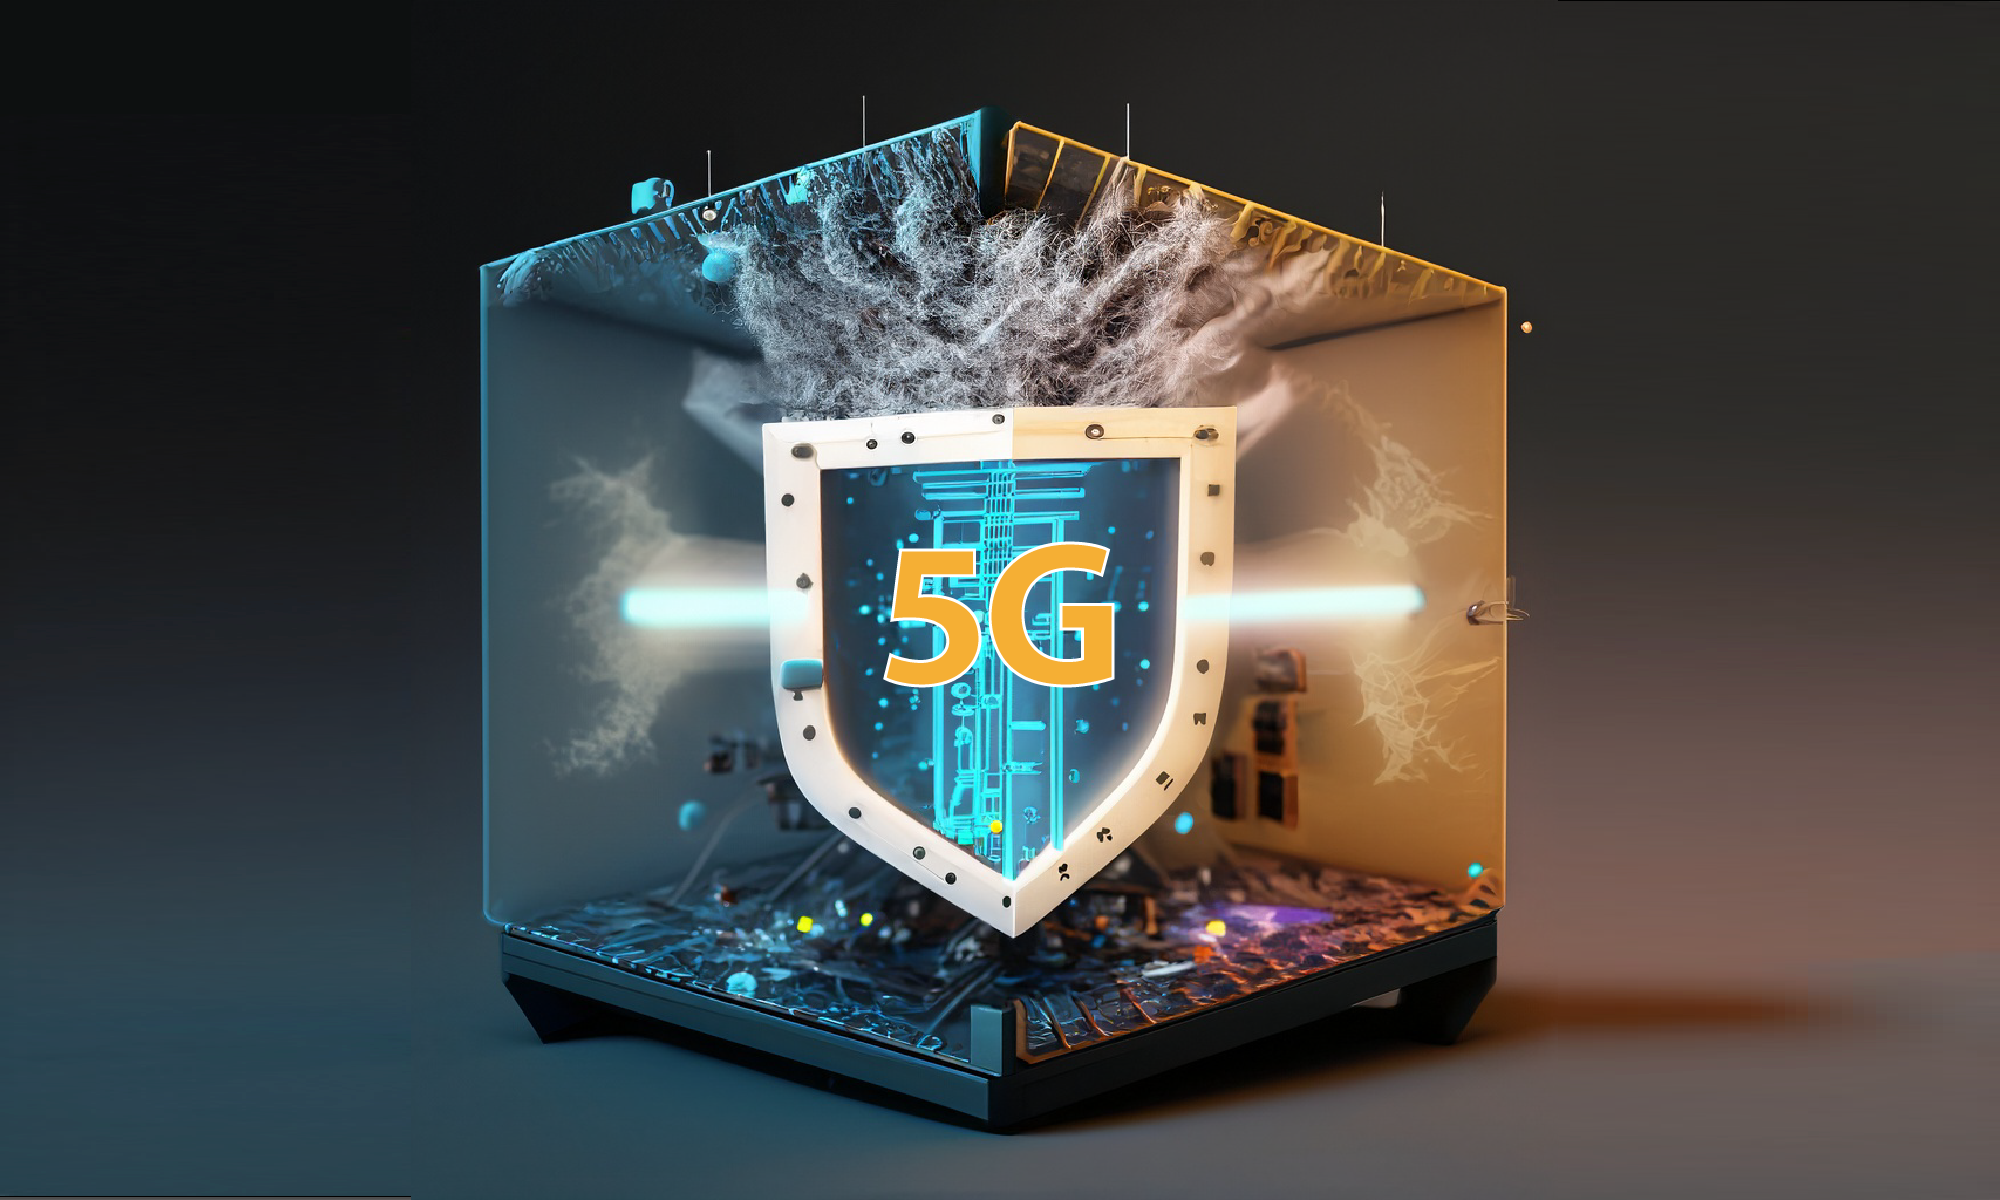 Without the Shield Box, 5G testing is out of the question